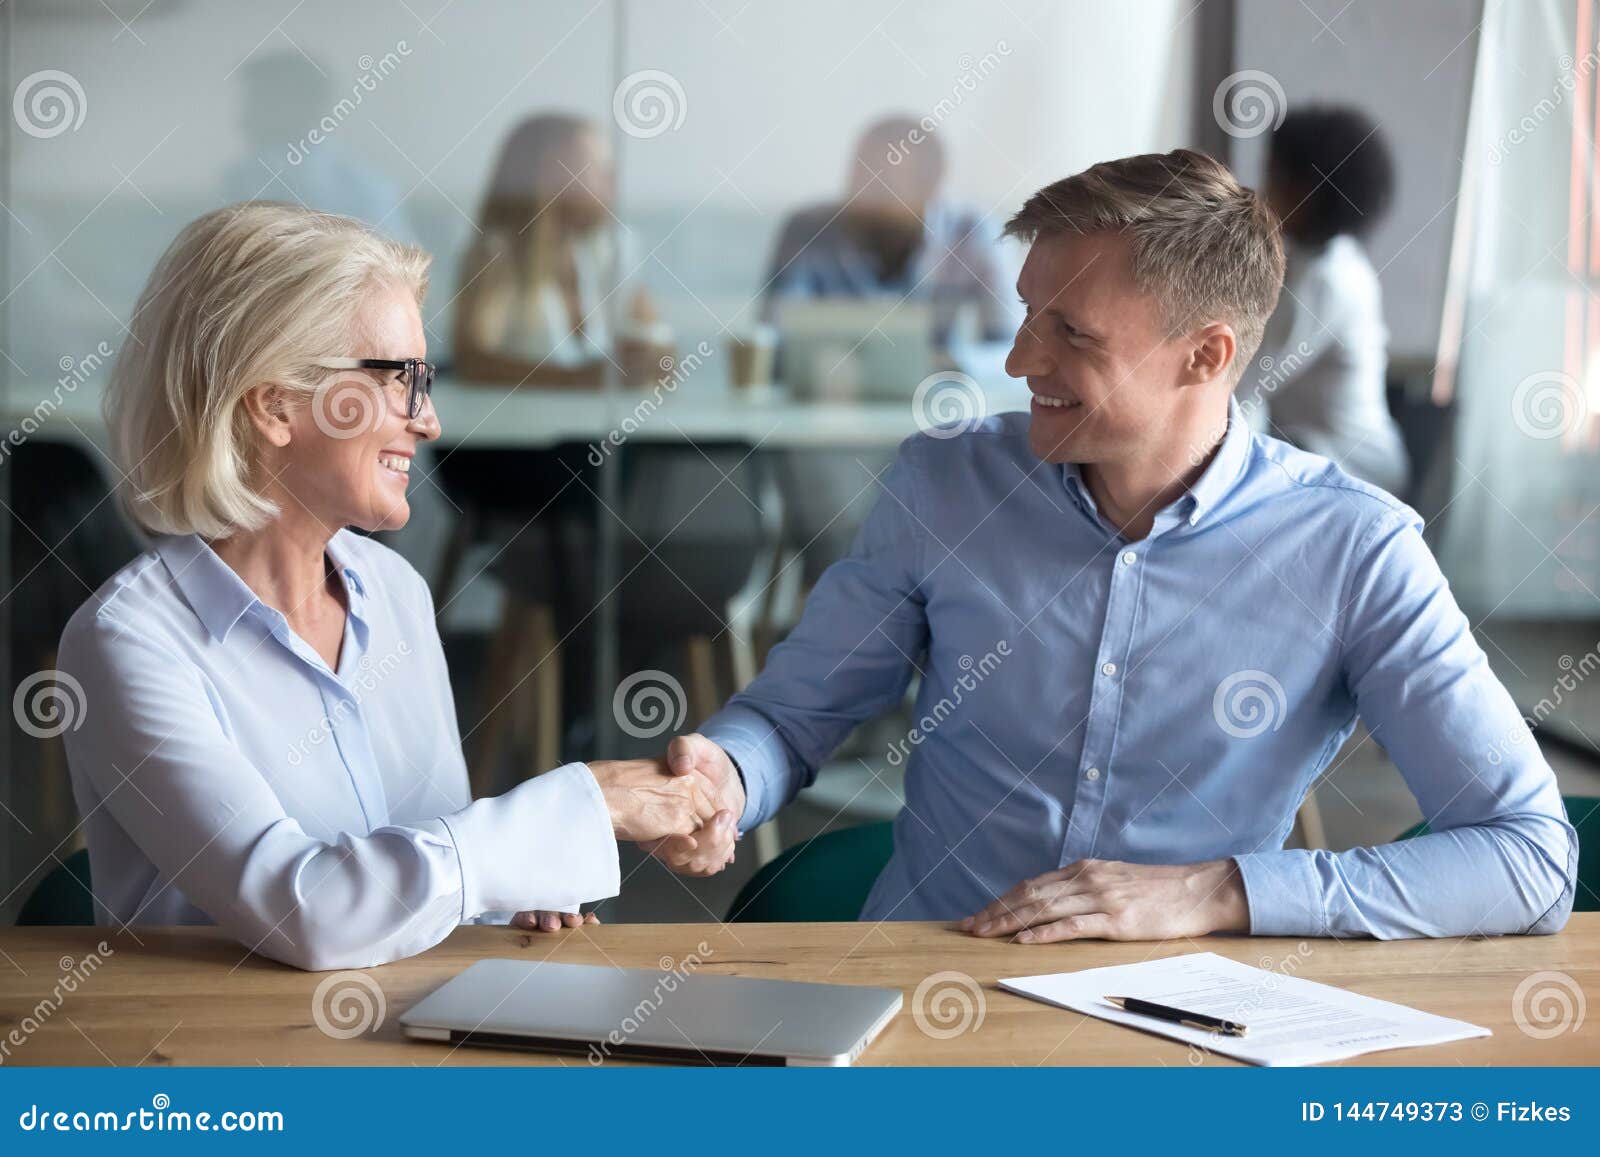 happy male client employee handshake broker hr manager at meeting